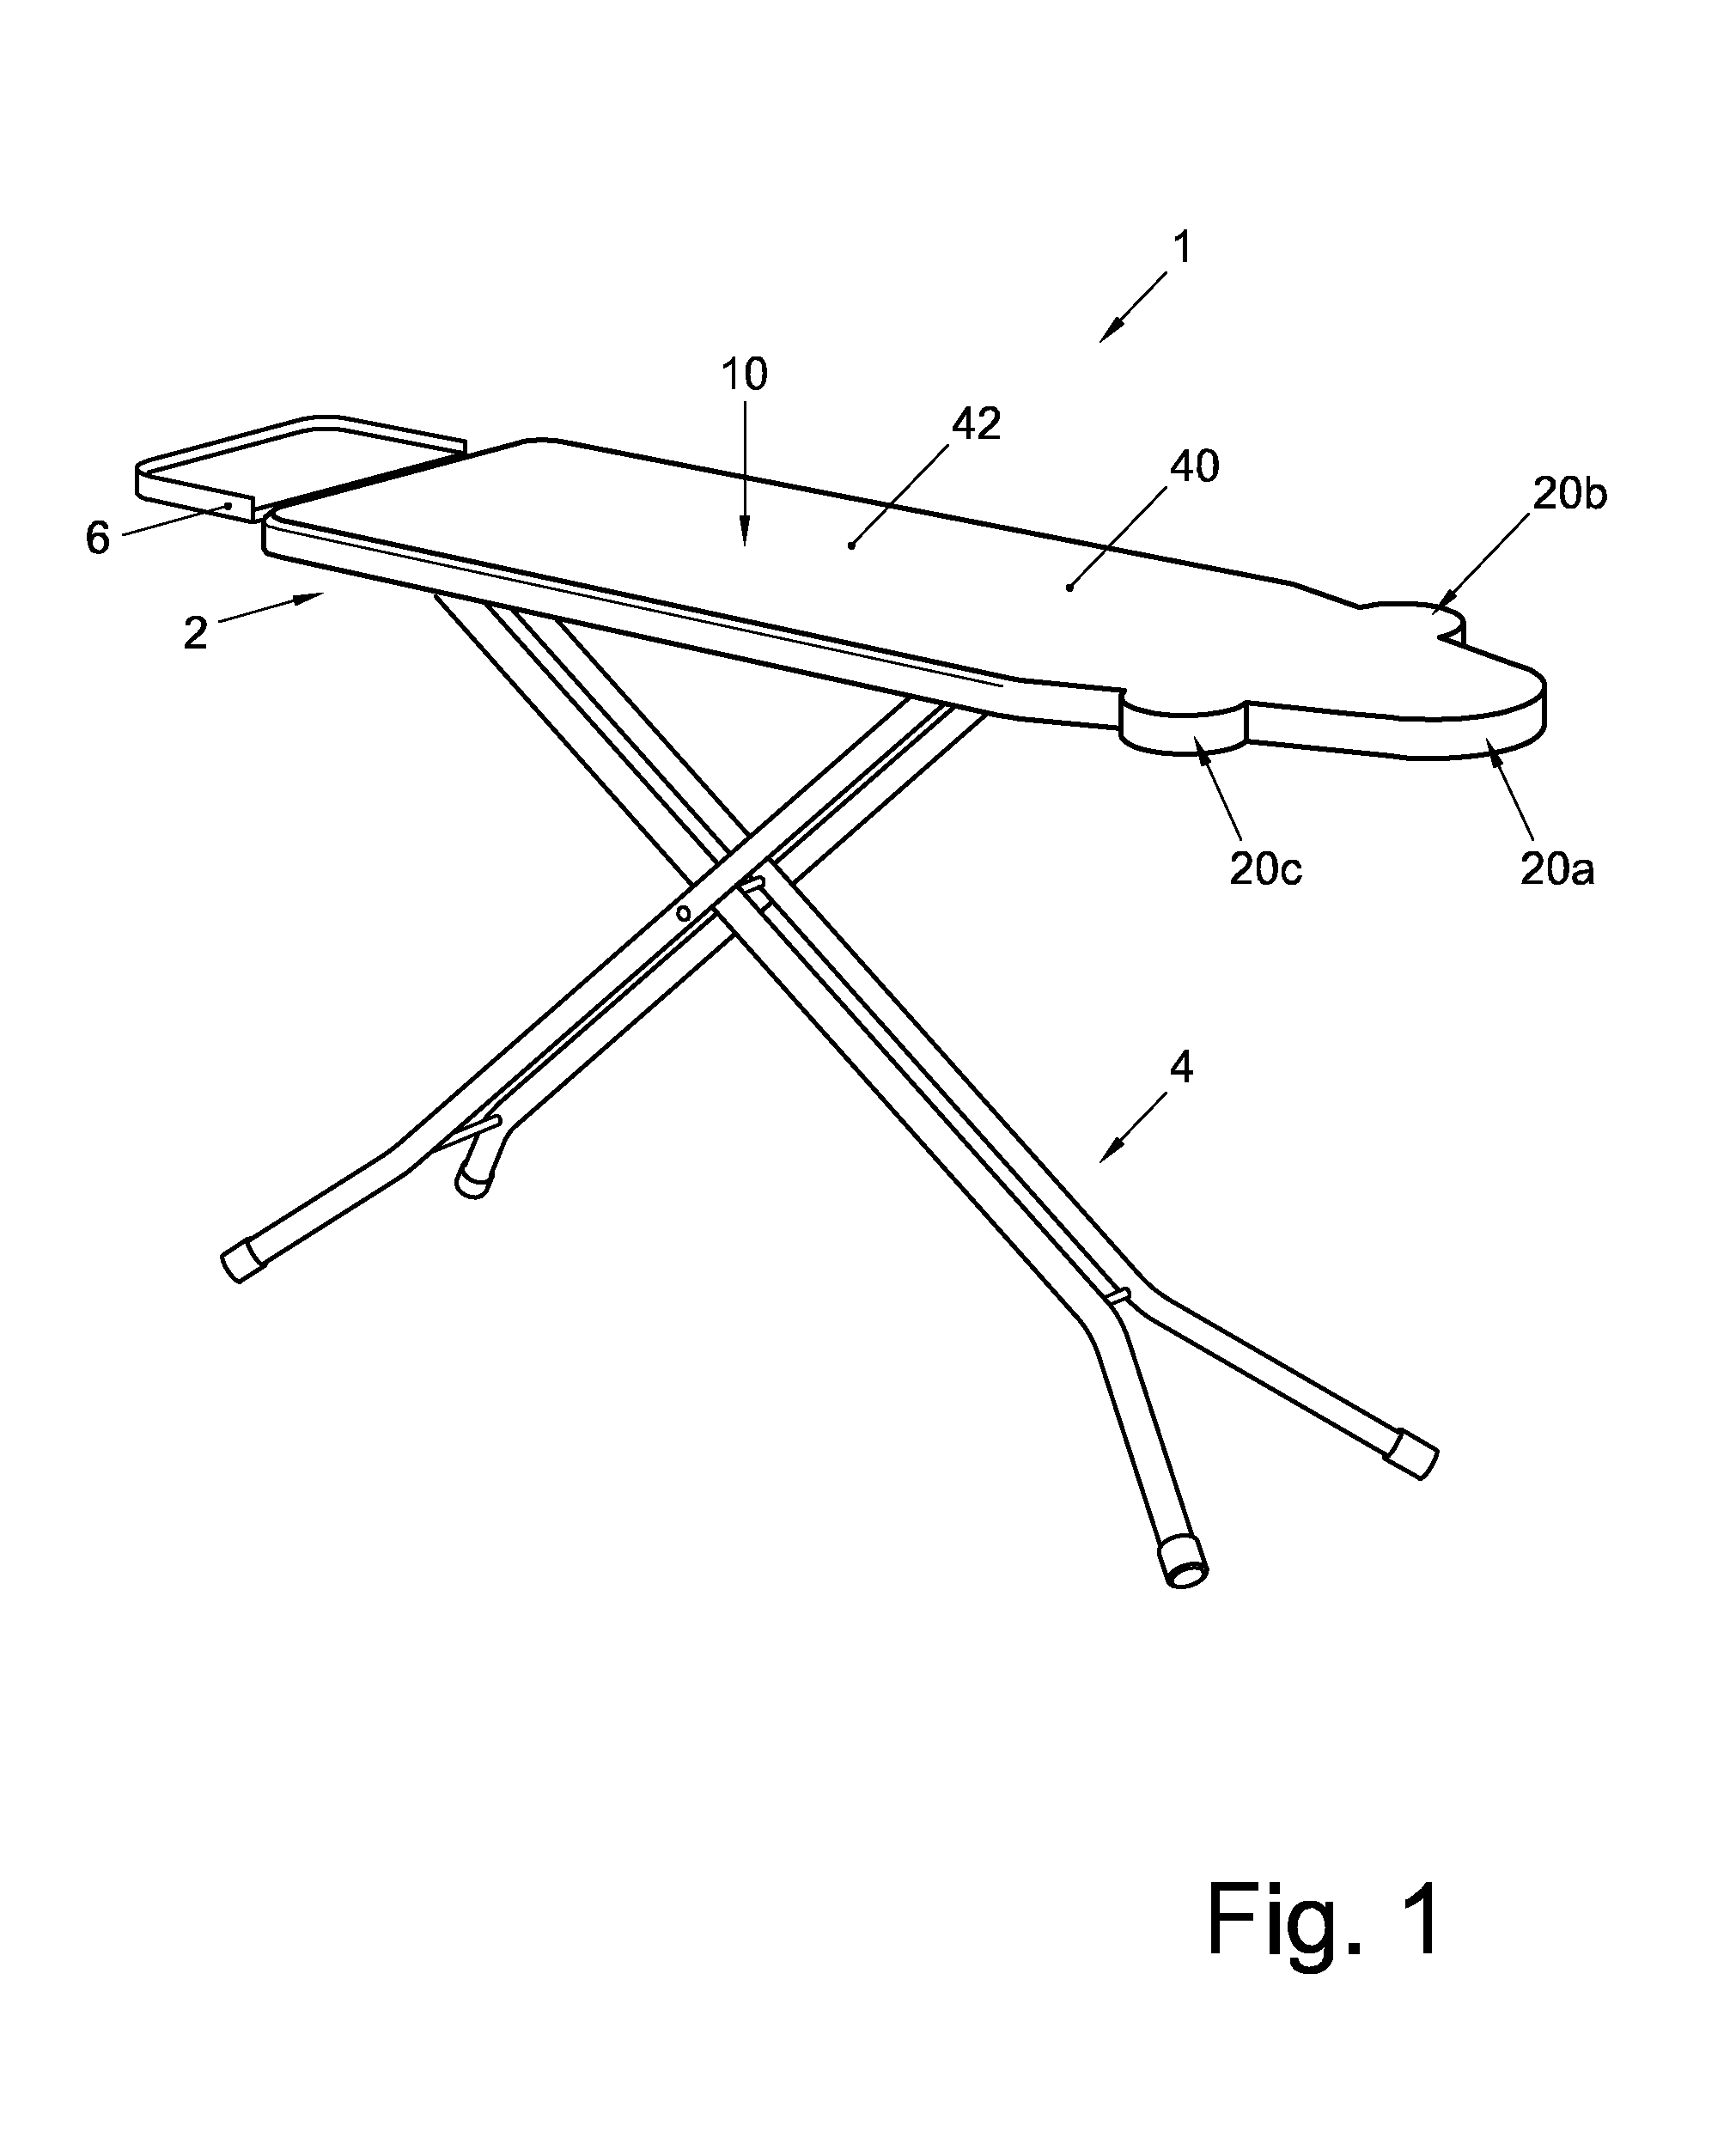 Ironing board assembly with configurable ironing surface and ironing board cover therefor